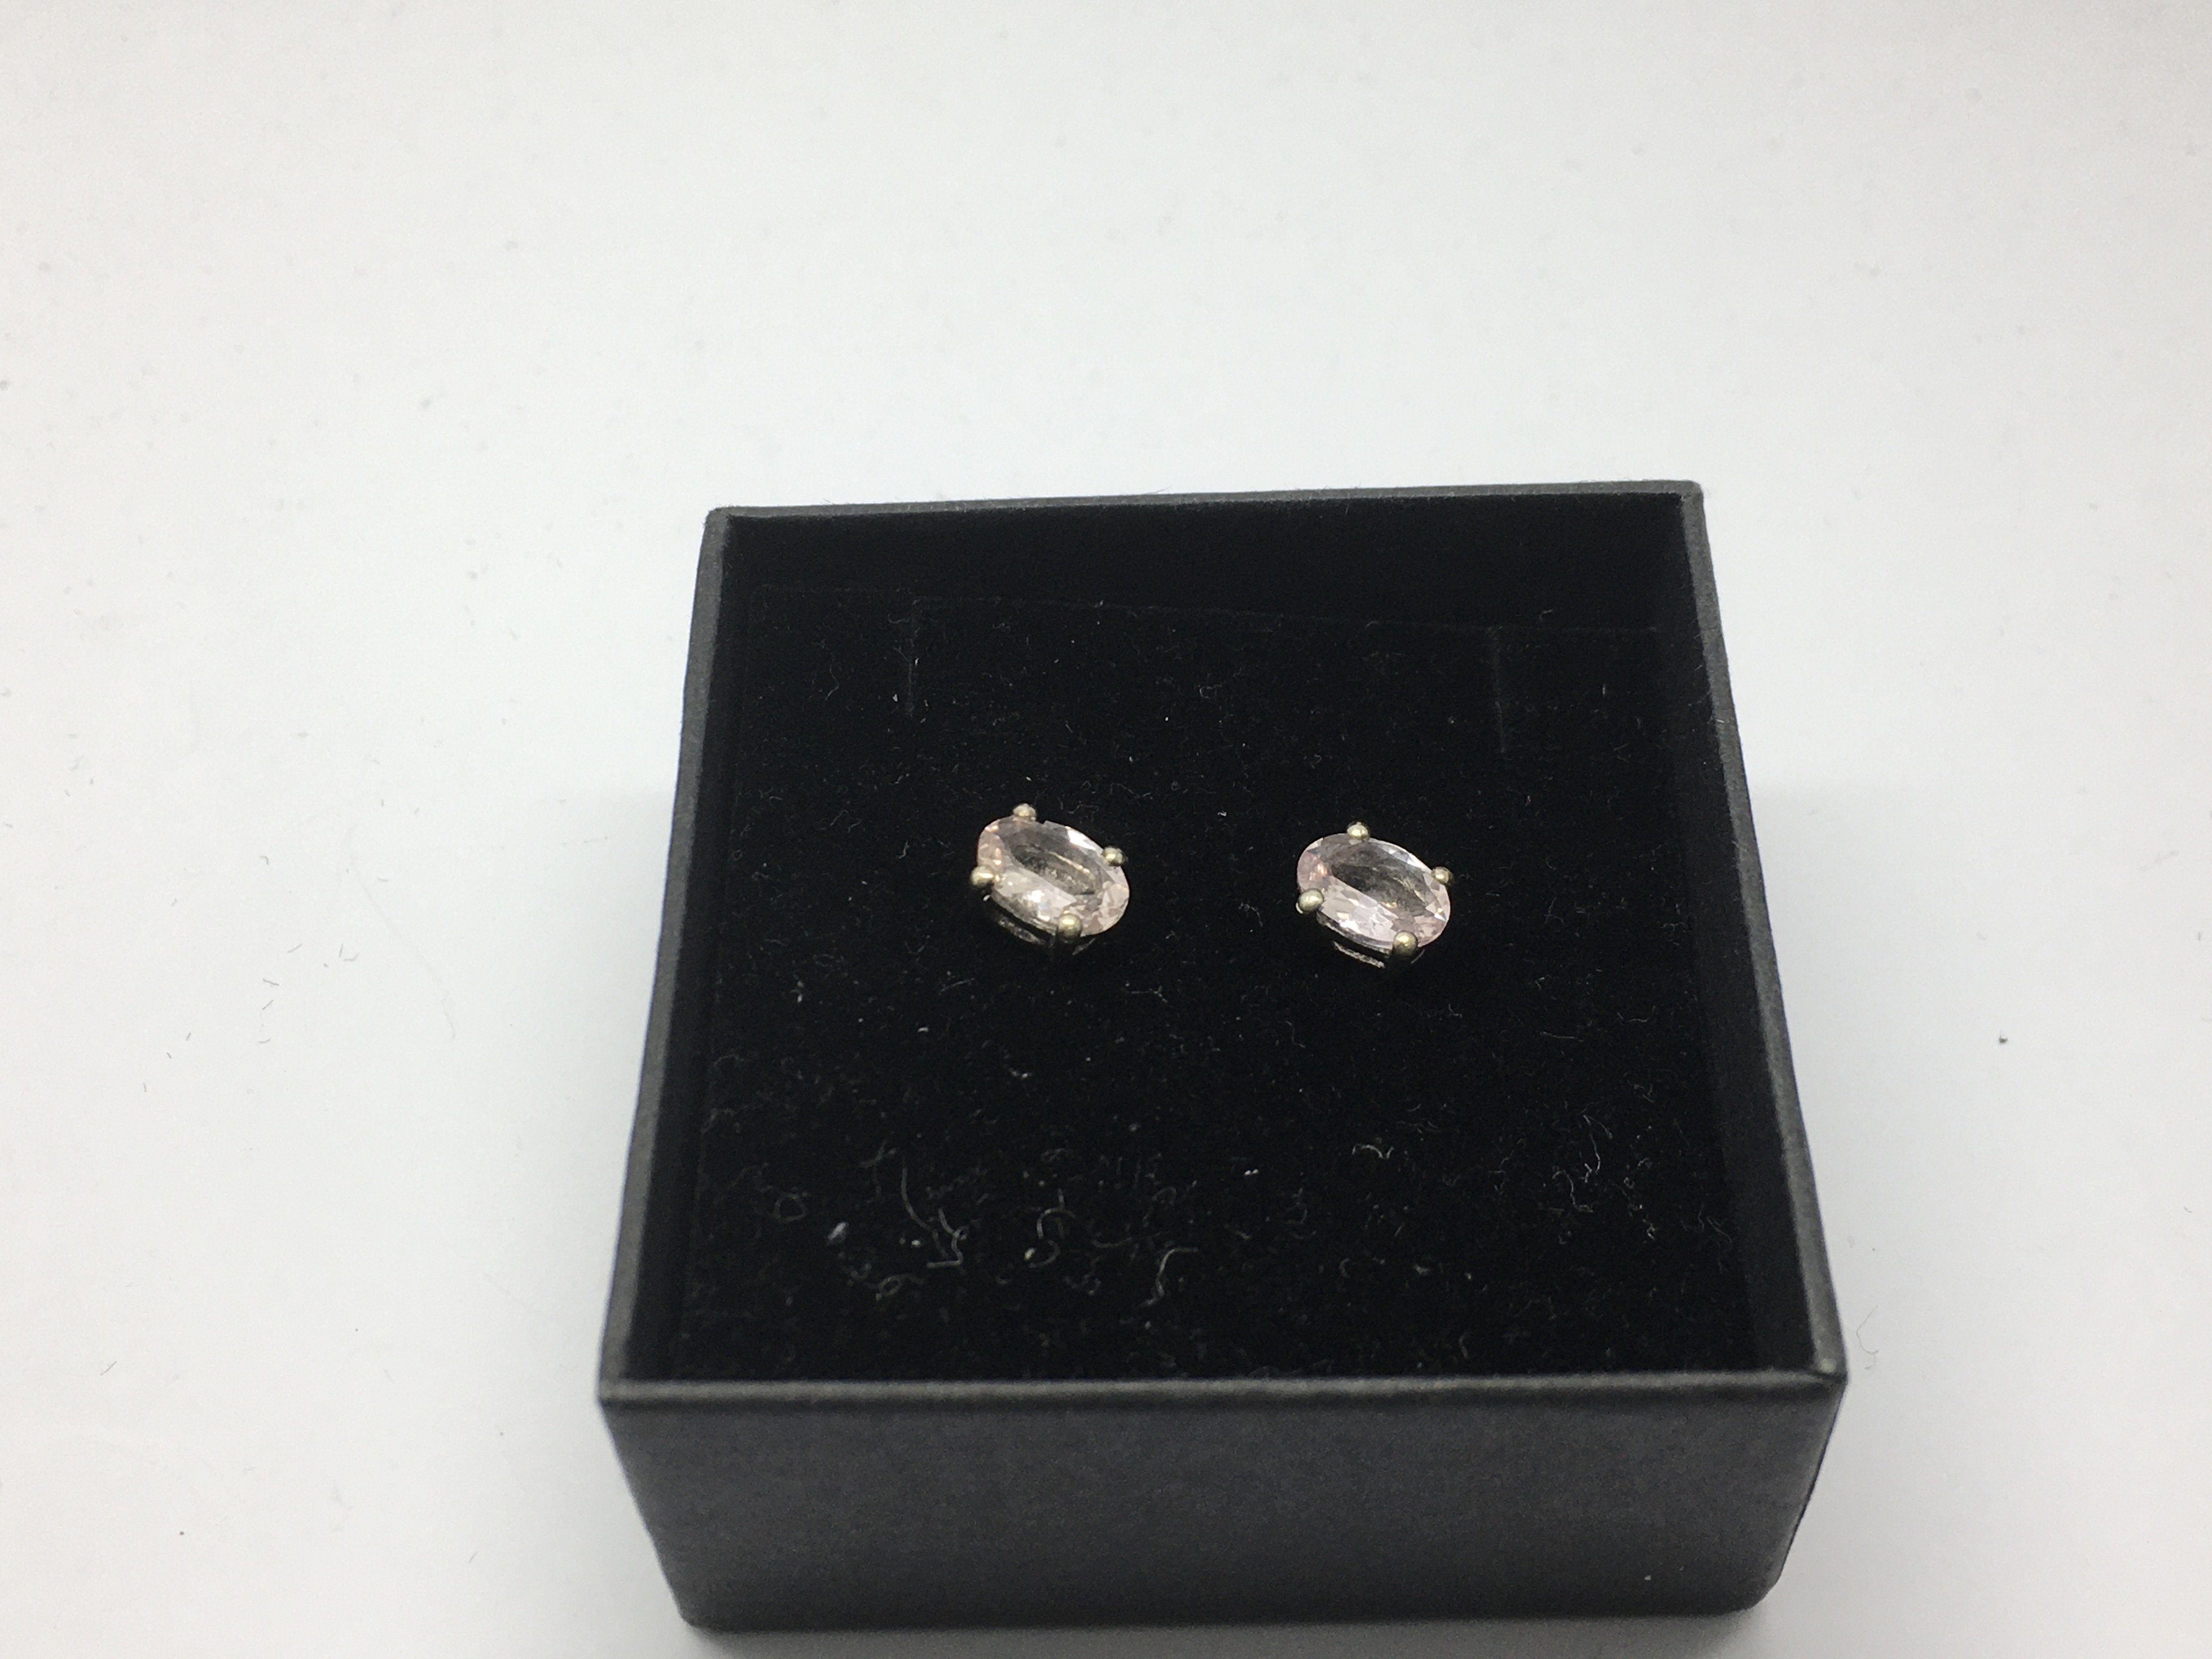 A pair of silver studs set with morganite.